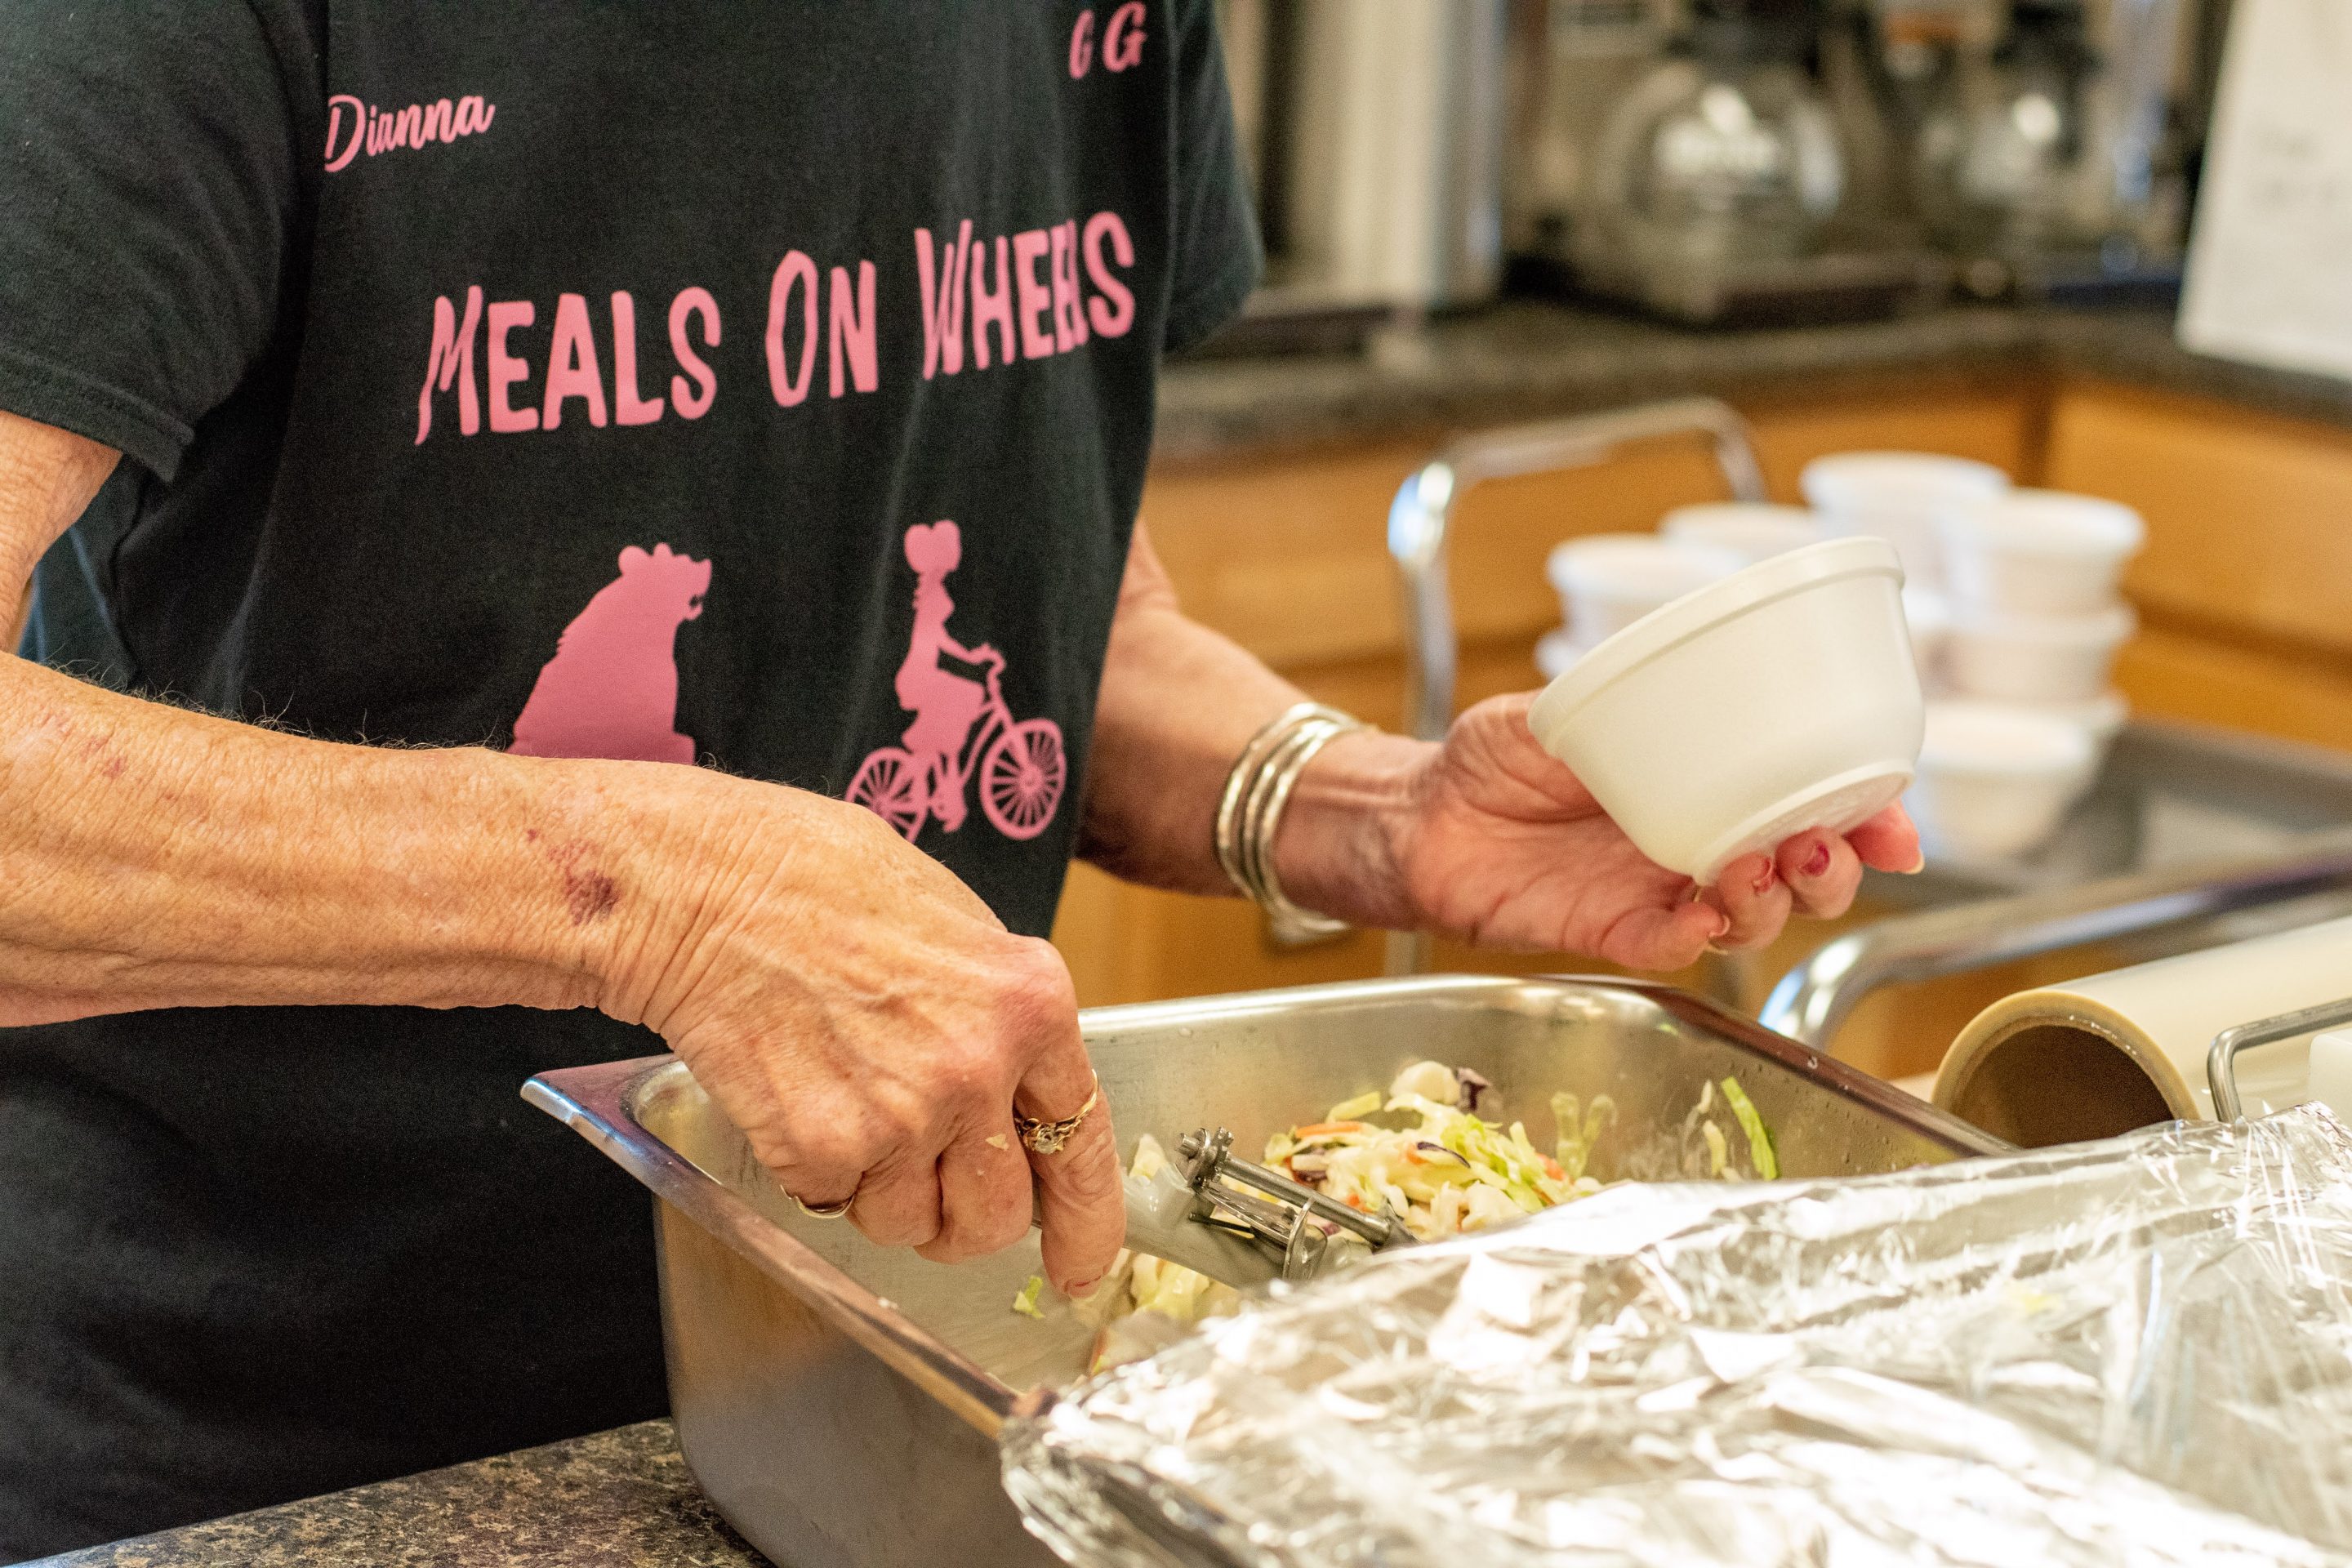 Volunteer scooping food into a to-go container for meal delivery